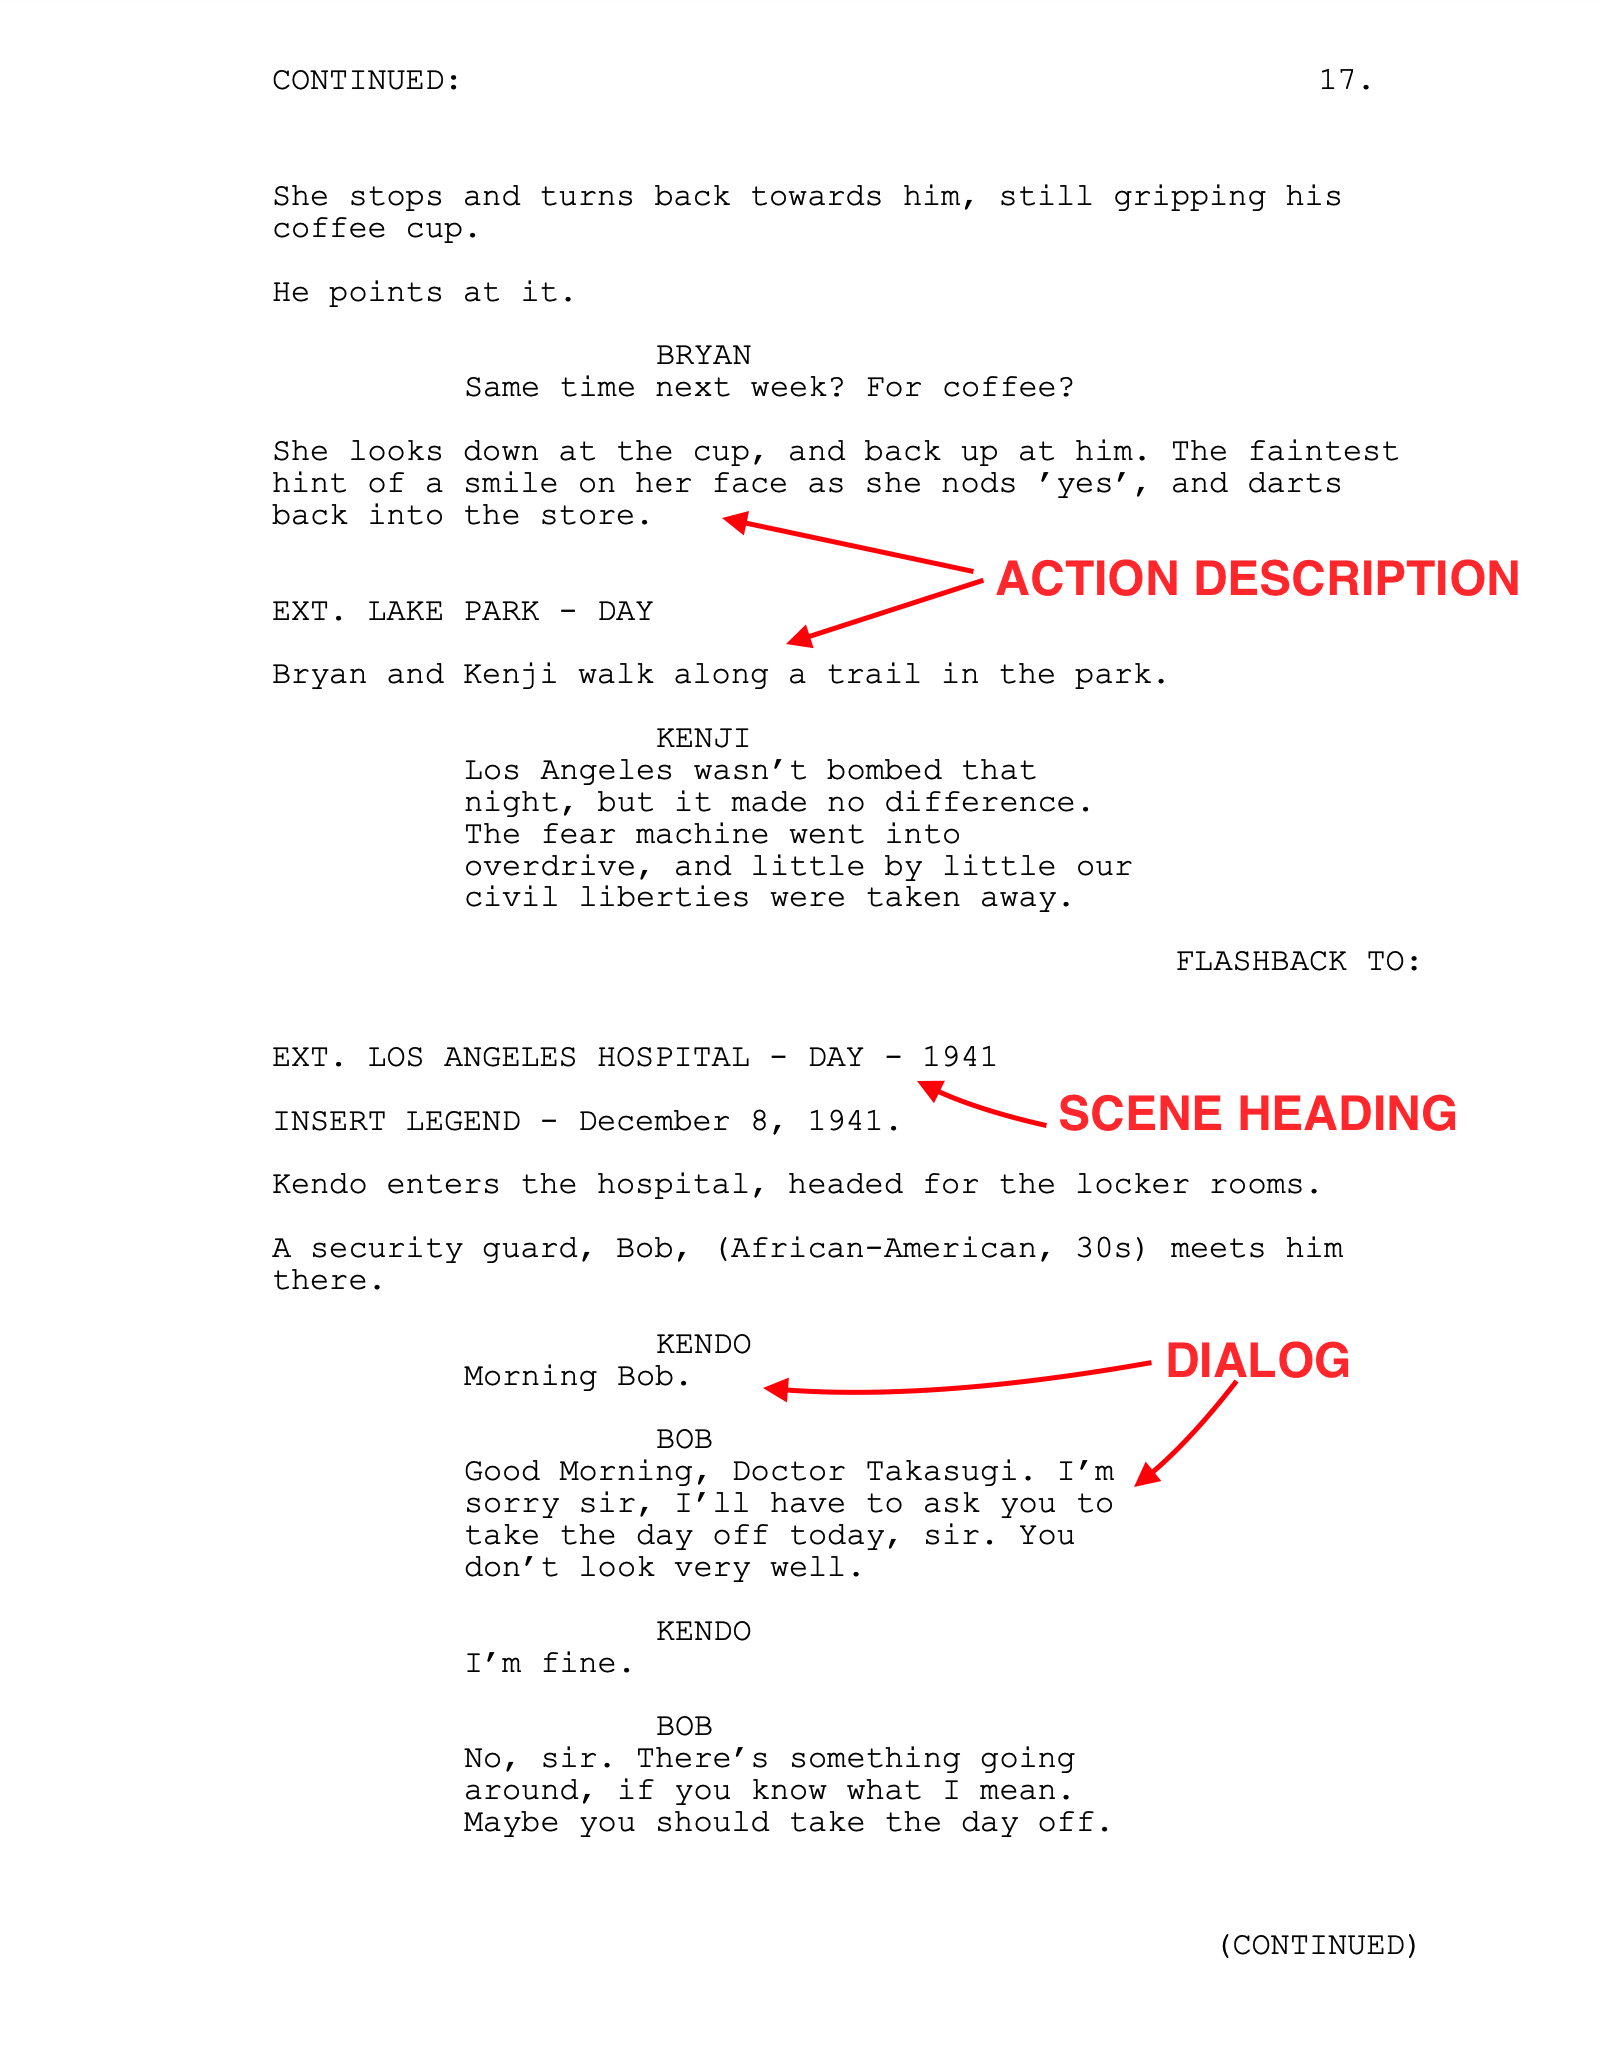 Example script page with annotations for Scene Heading, Action and Dialog